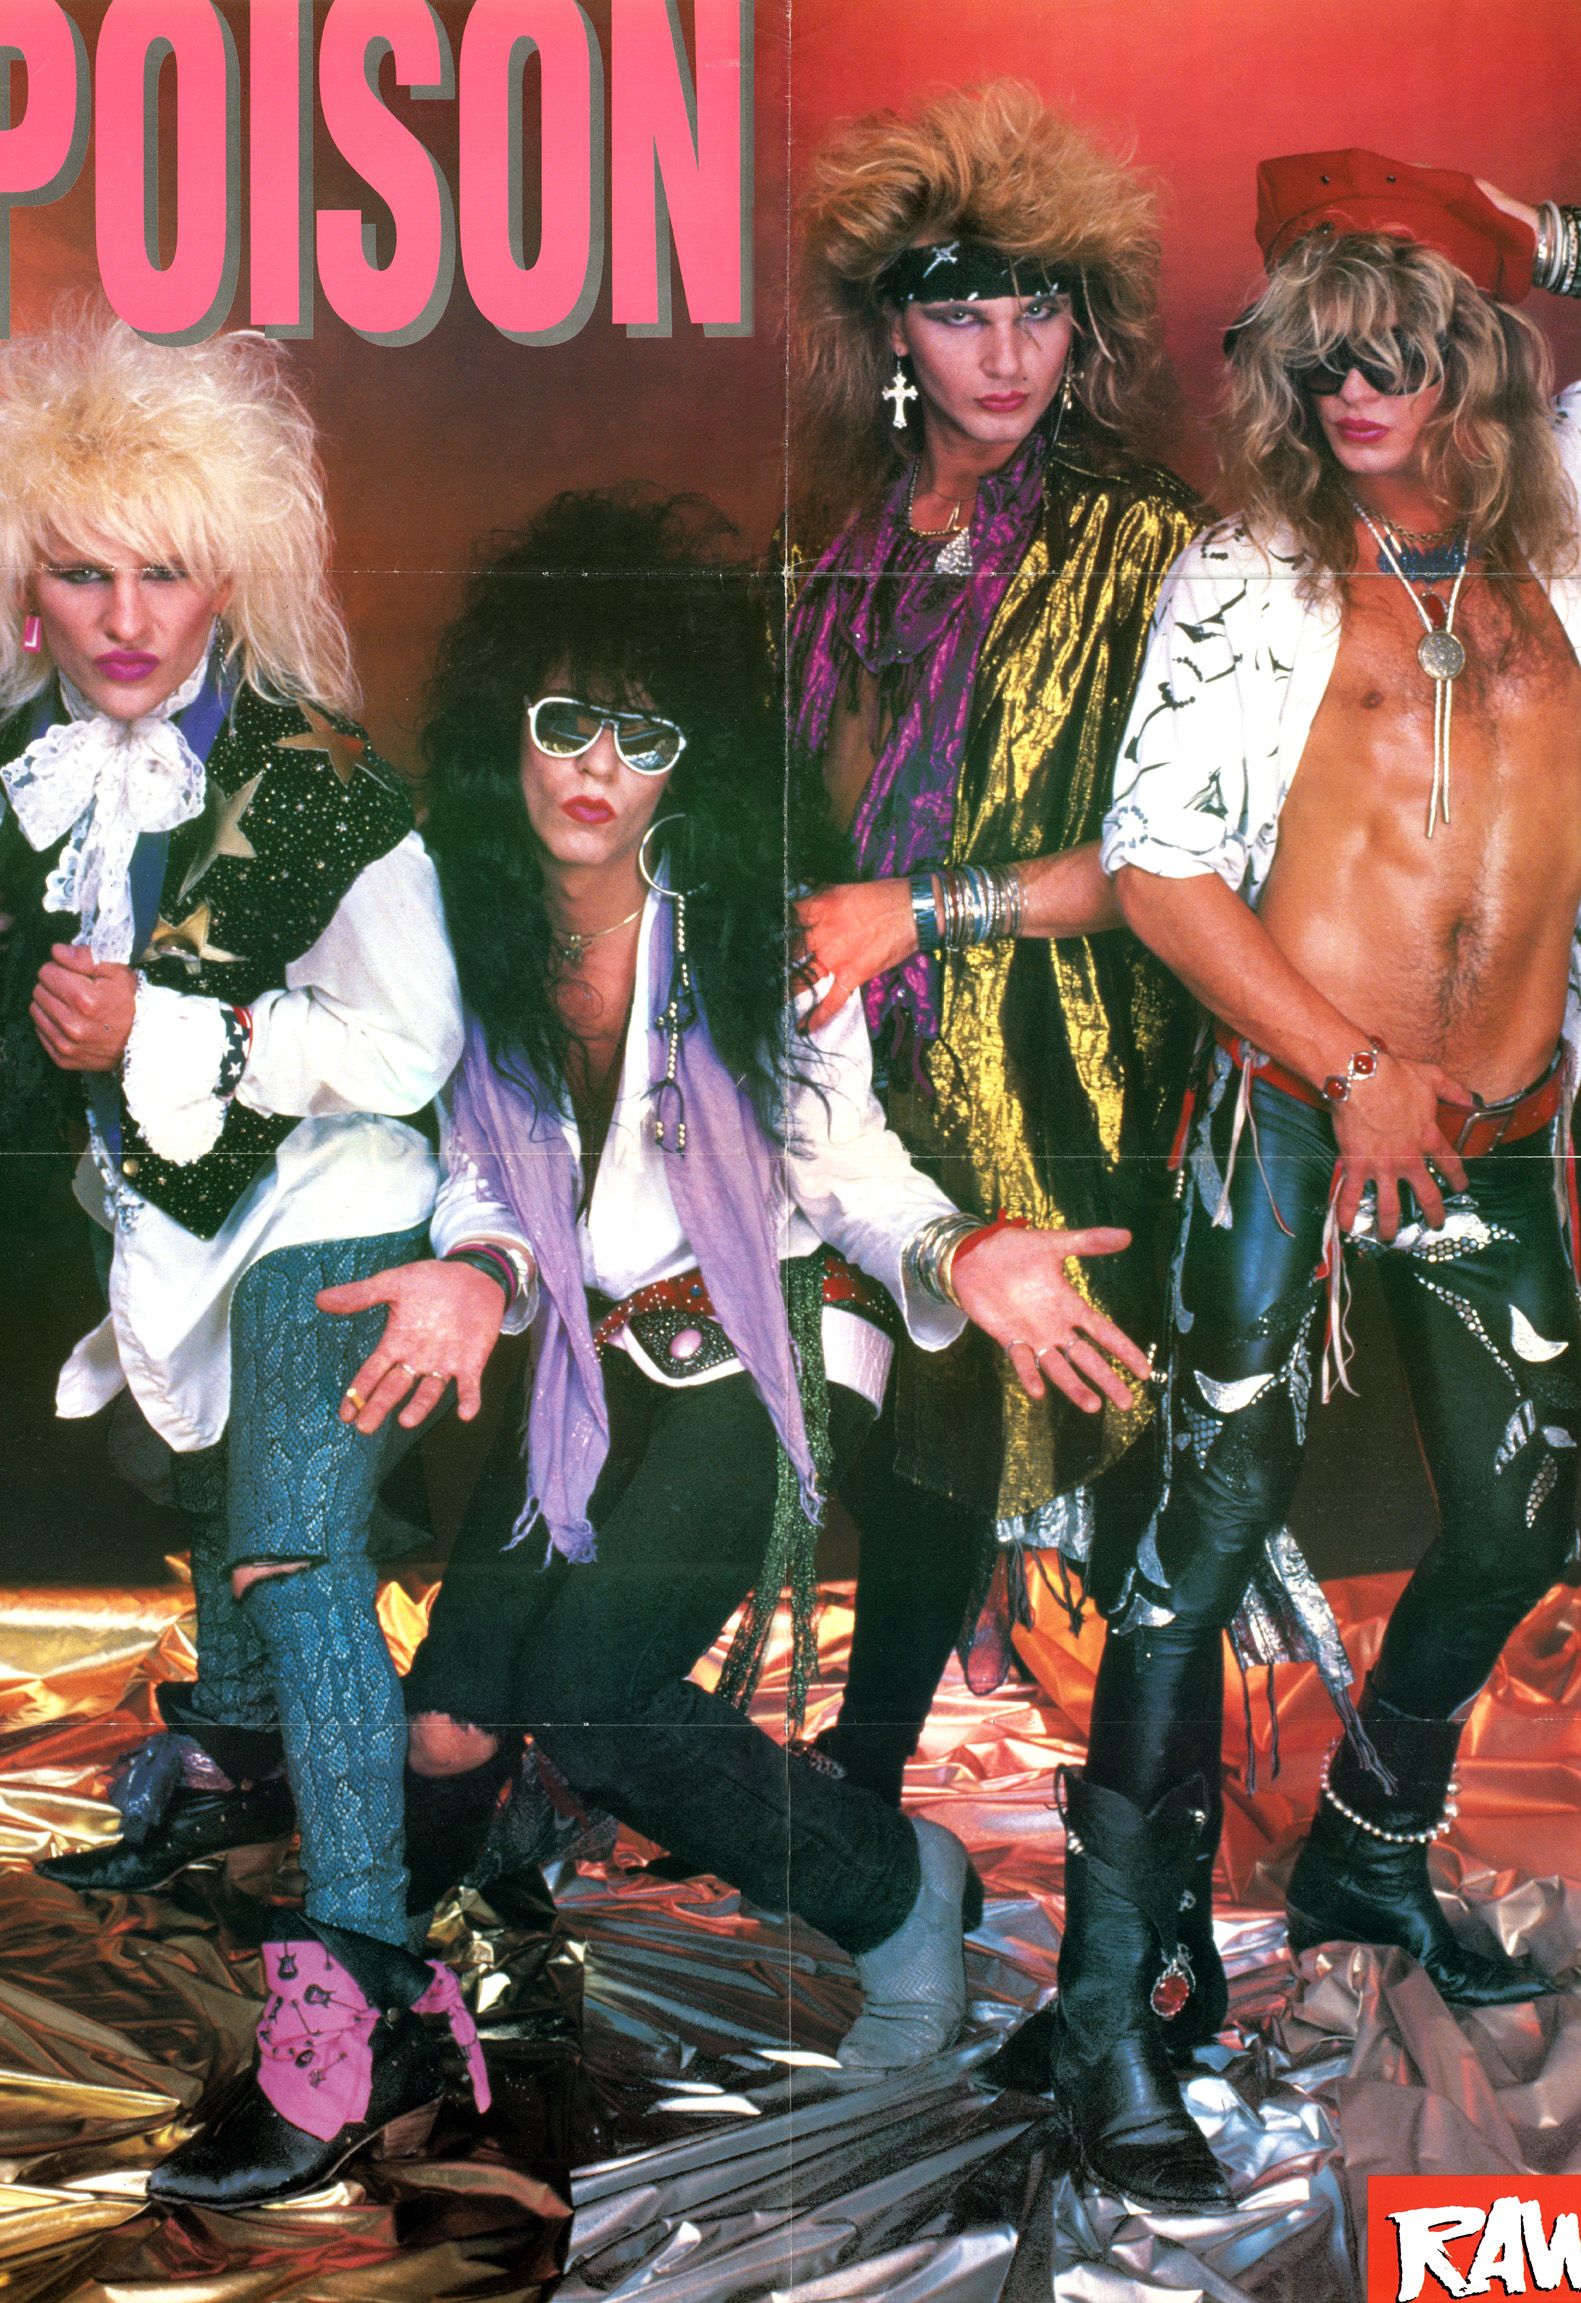 bands.s hair bands, 80s party outfits, 80s hair metal